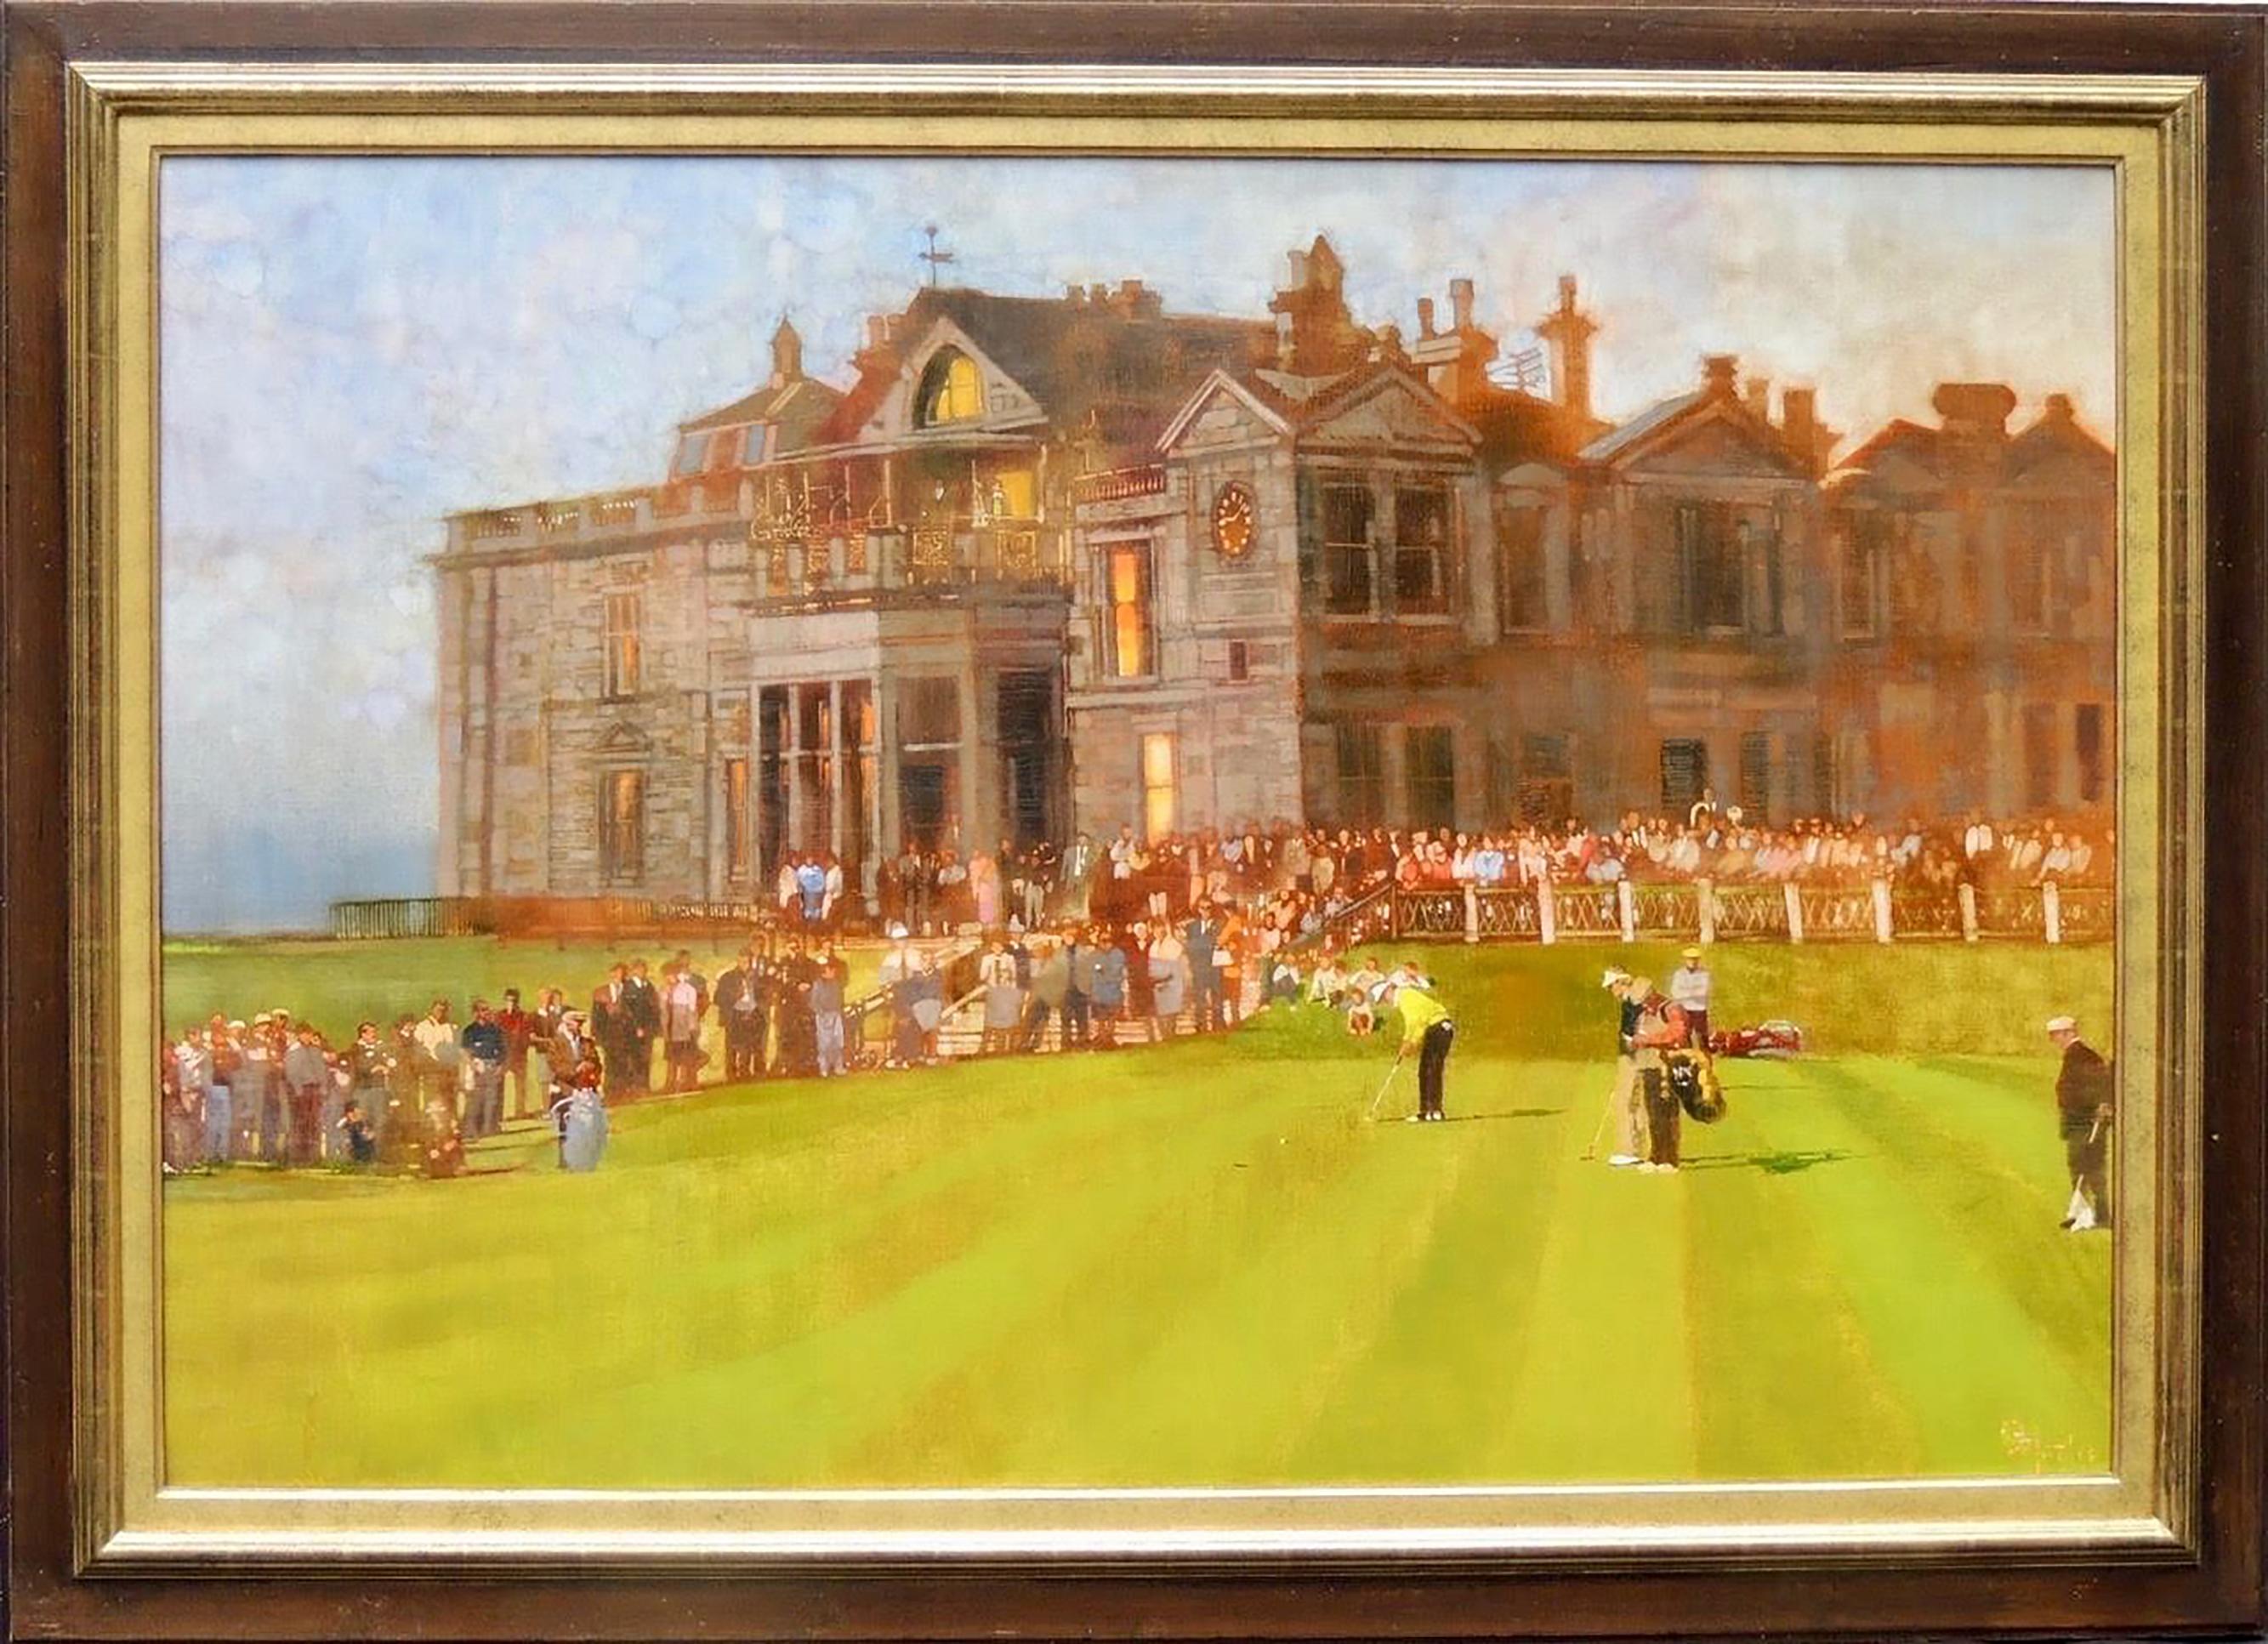 St. Andrews - Painting by Bernie Fuchs